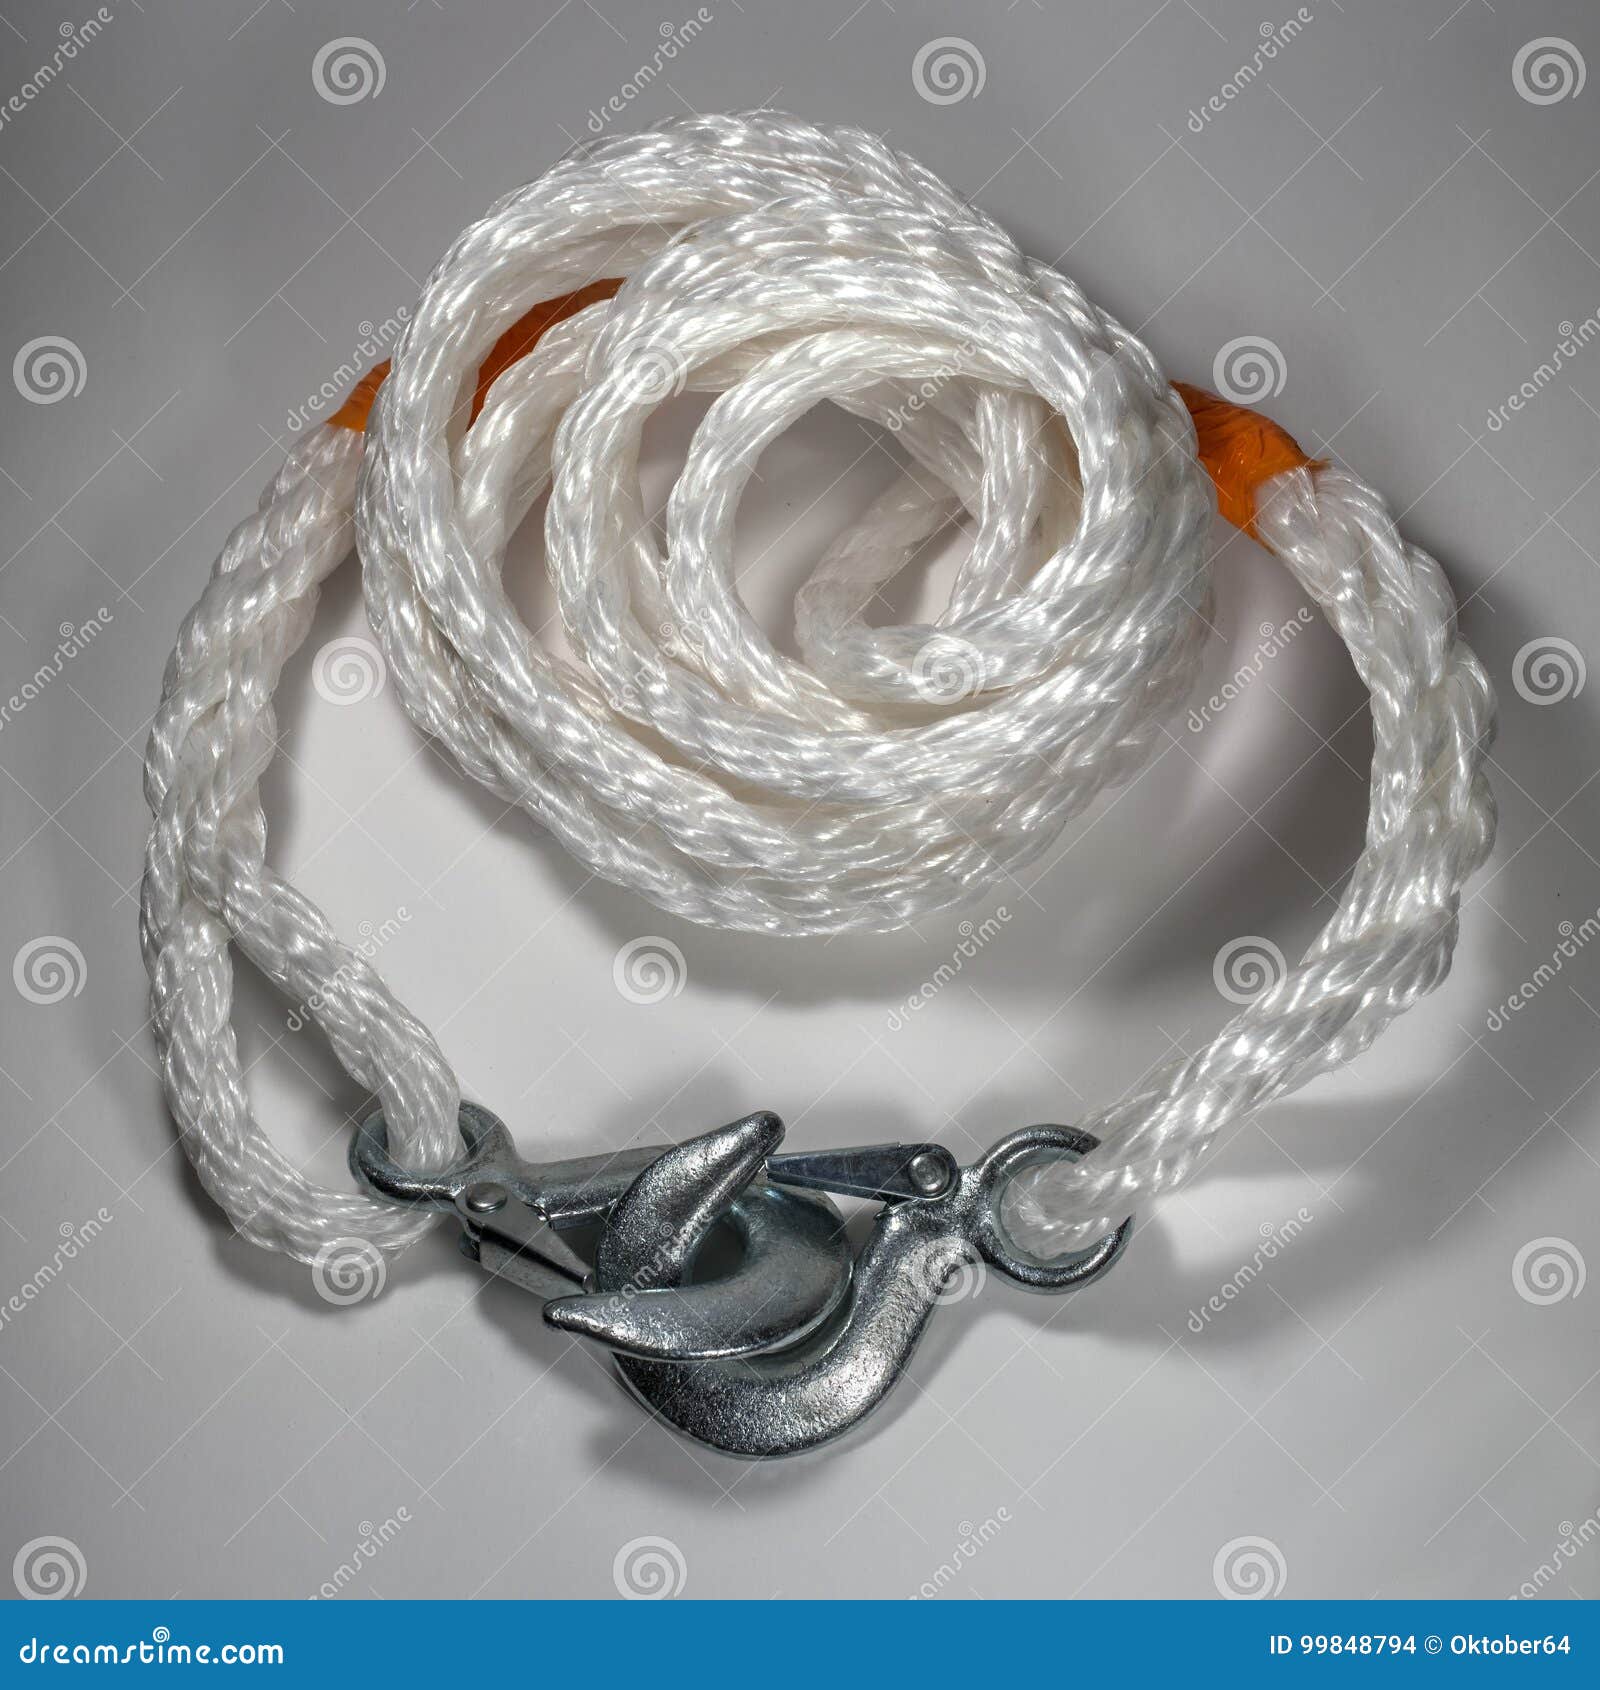 https://thumbs.dreamstime.com/z/tow-rope-hooks-light-background-tow-rope-hooks-light-background-white-braided-synthetic-cable-99848794.jpg